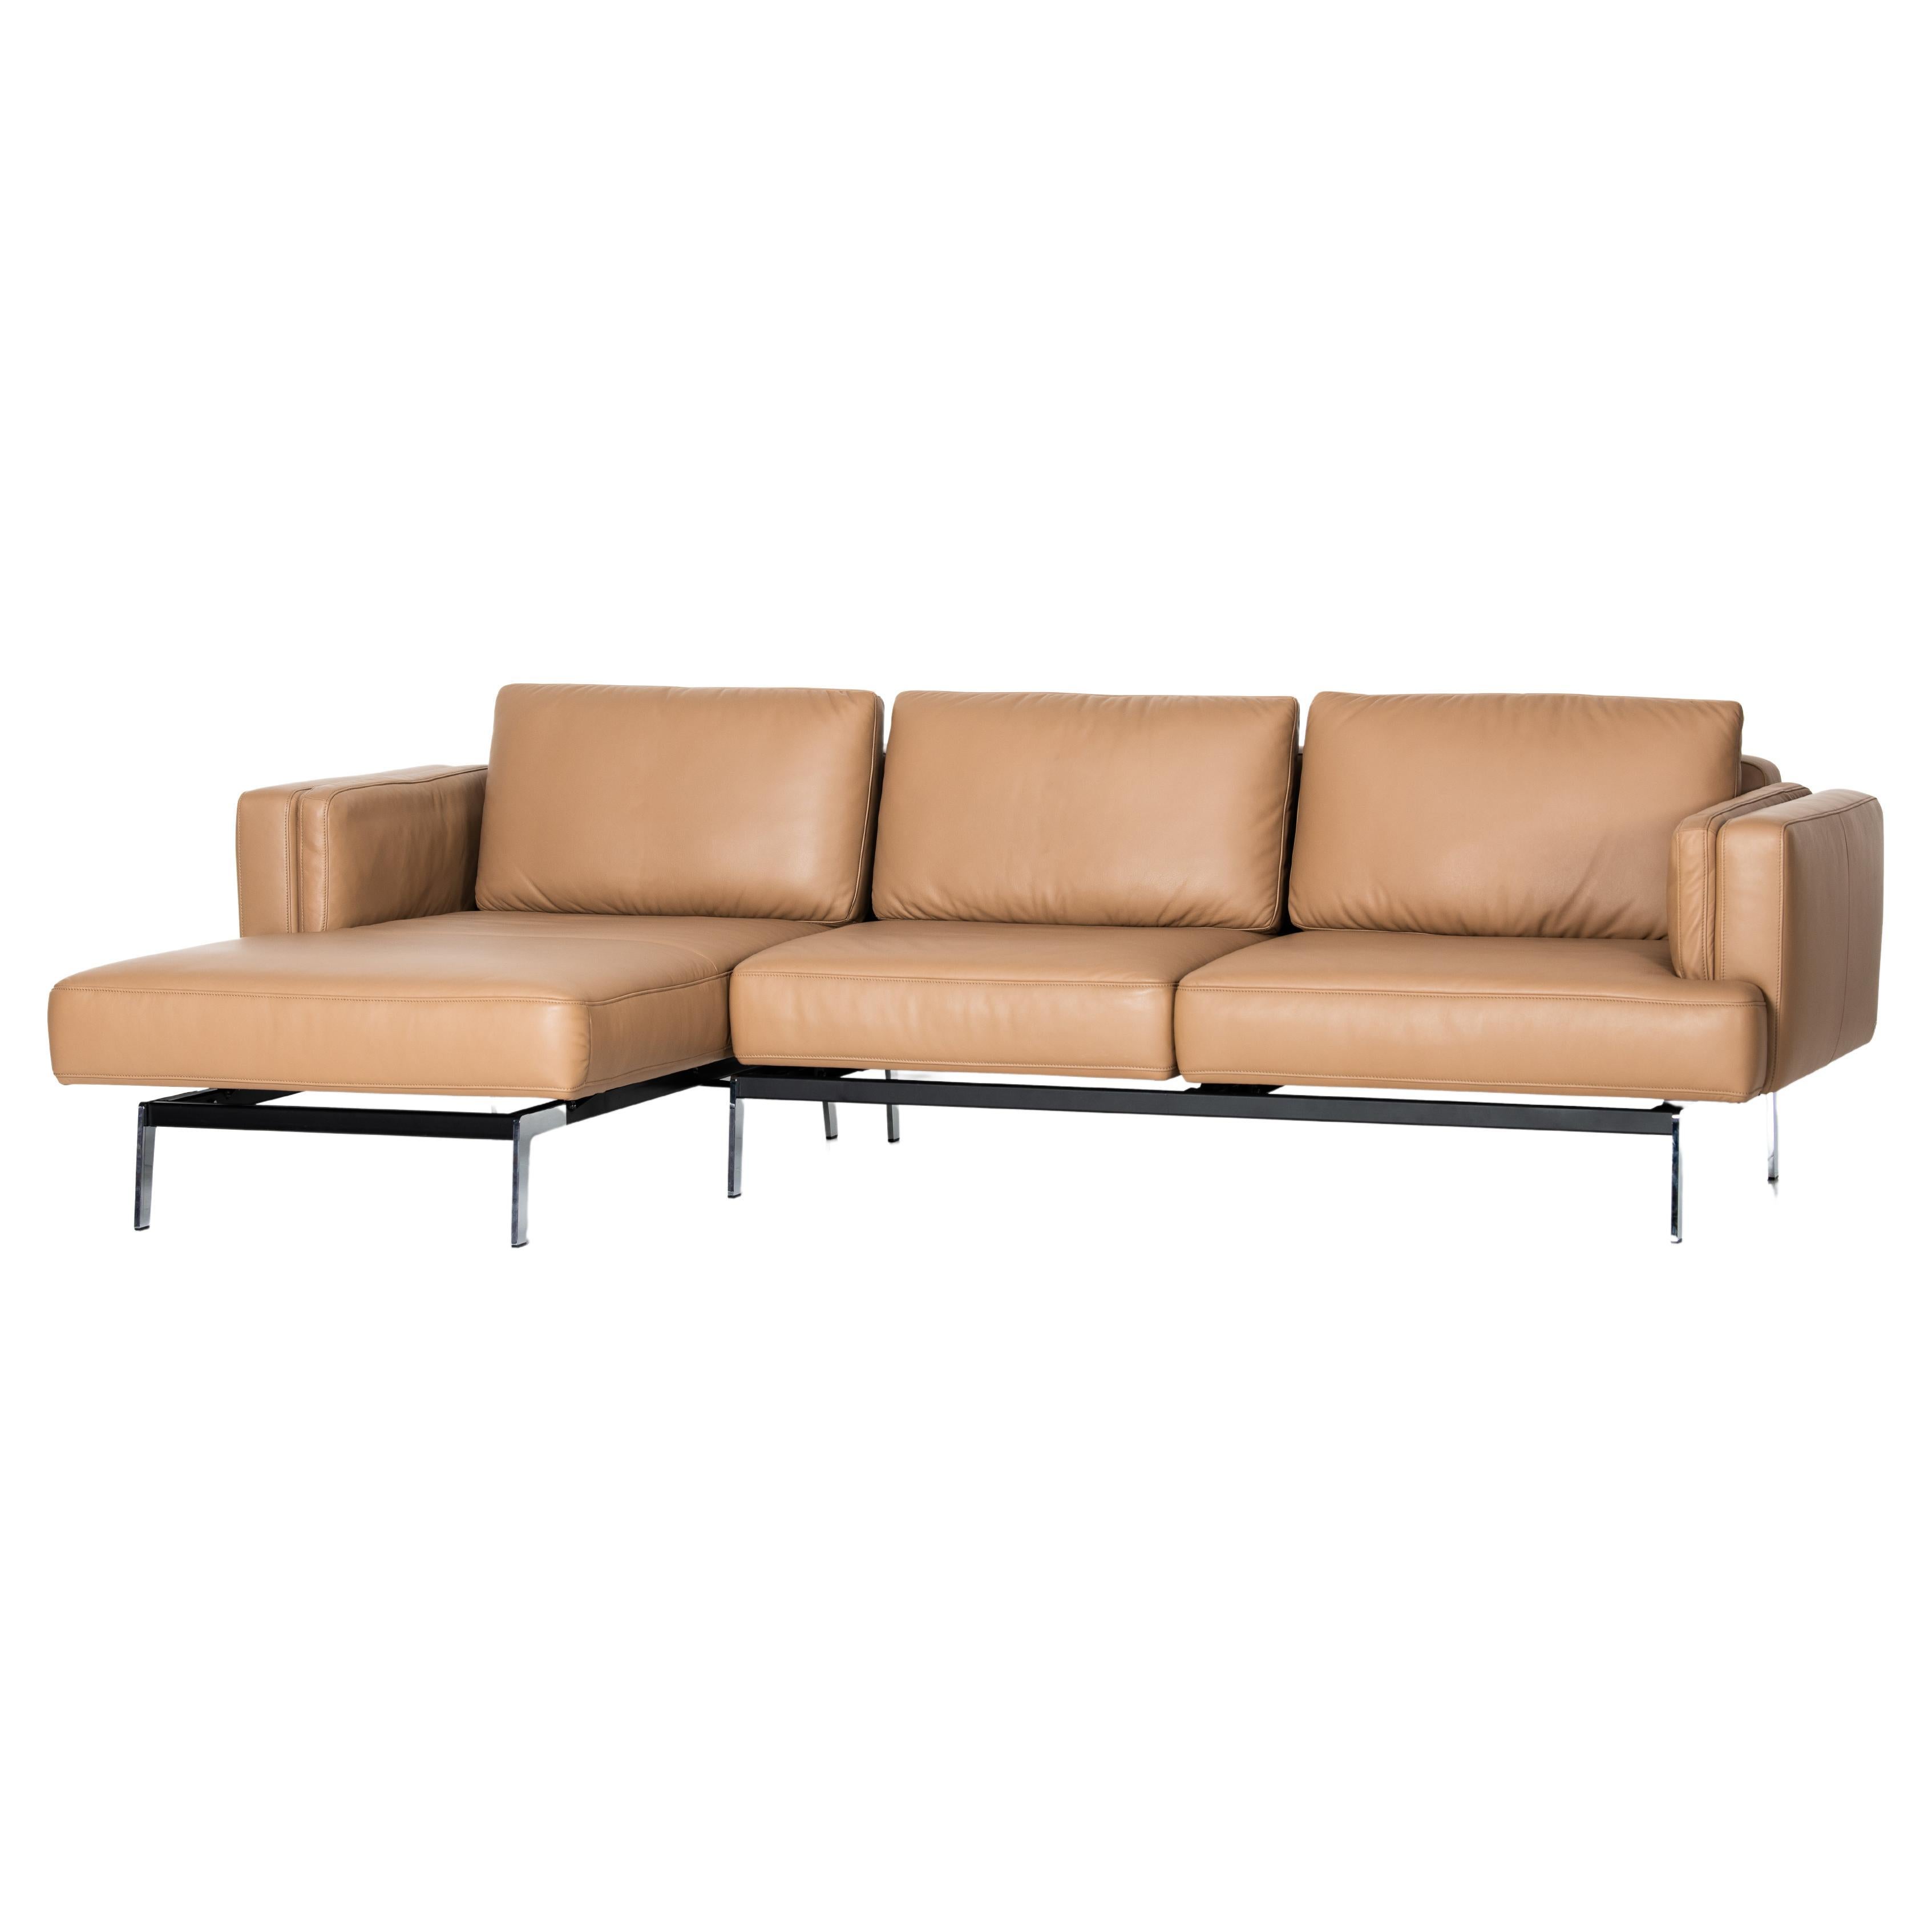 De Sede DS-747/20 Multifunctional Sofa in Noce Leather Seat and Back Upholstery For Sale